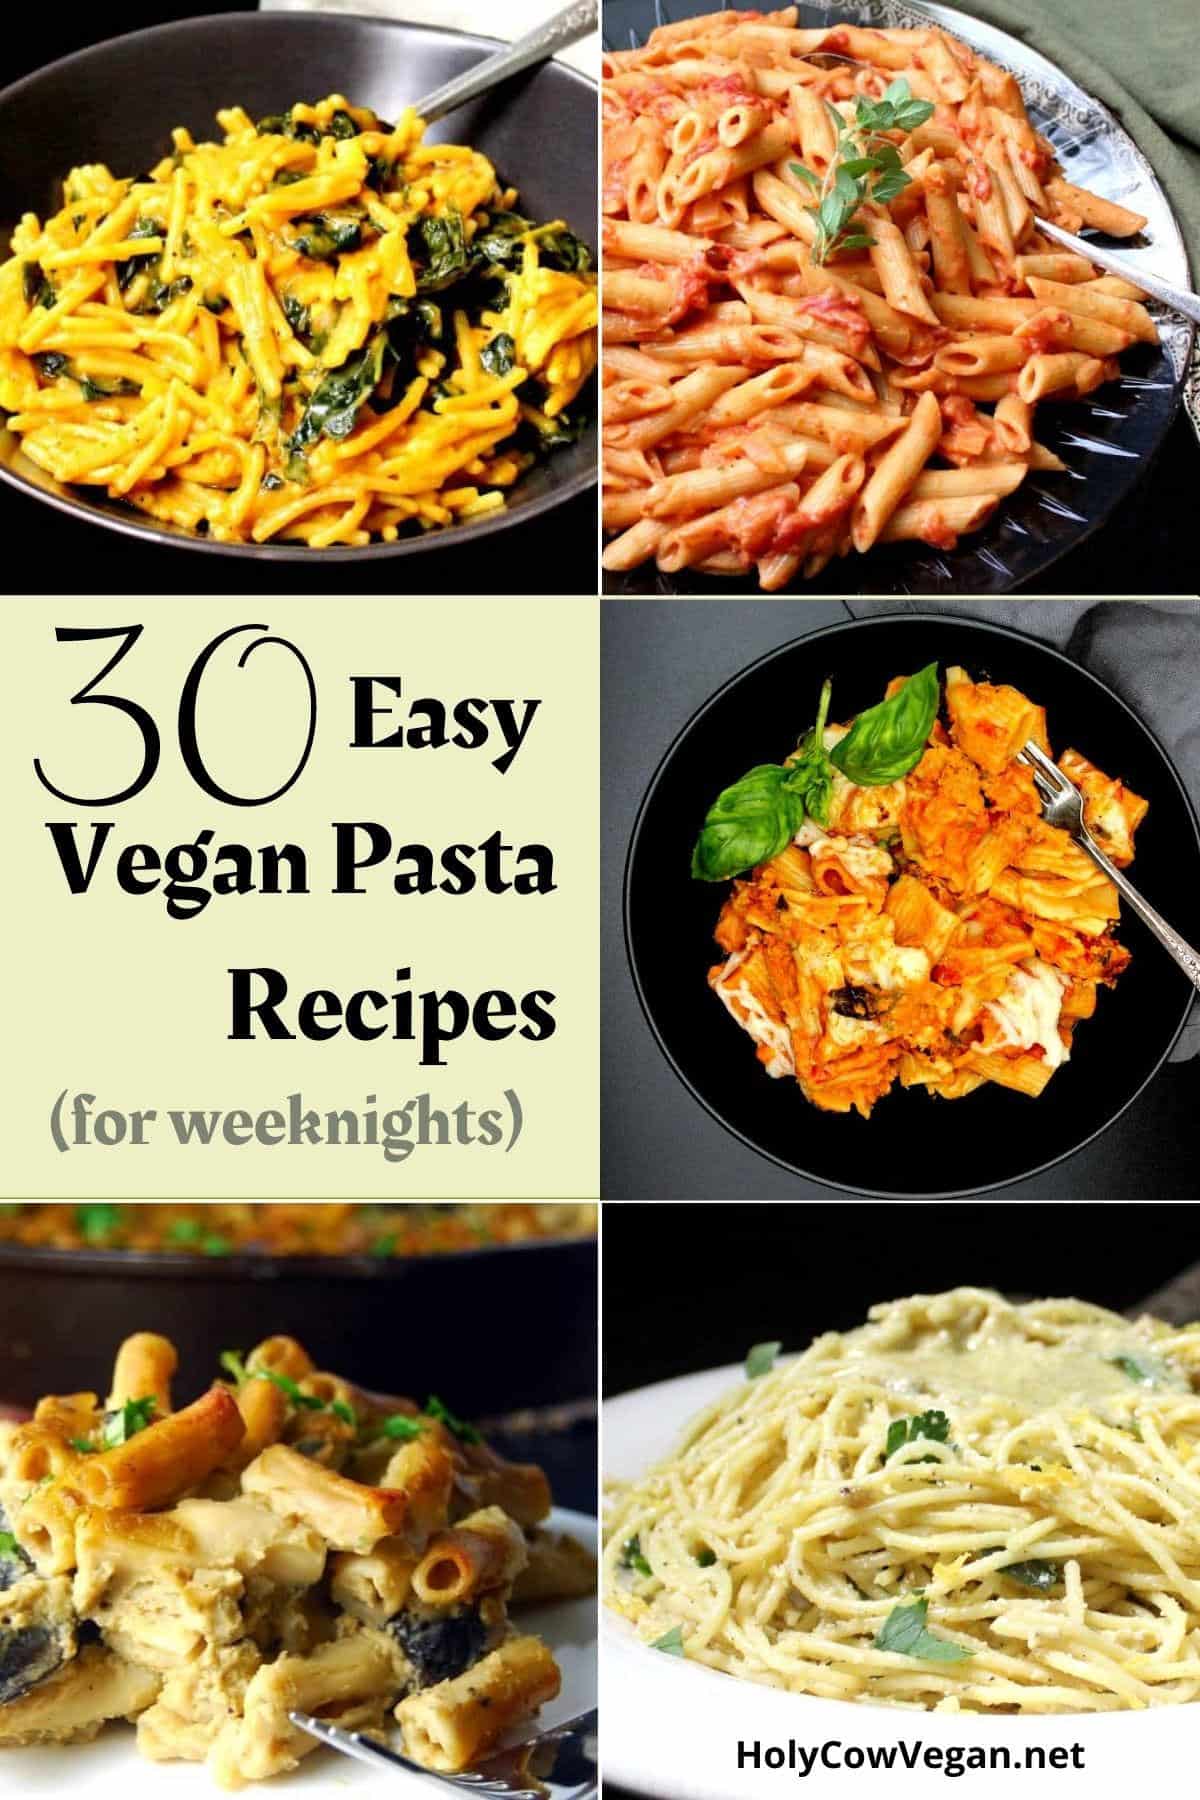 Images of vegan pasta recipes for weeknight dinners